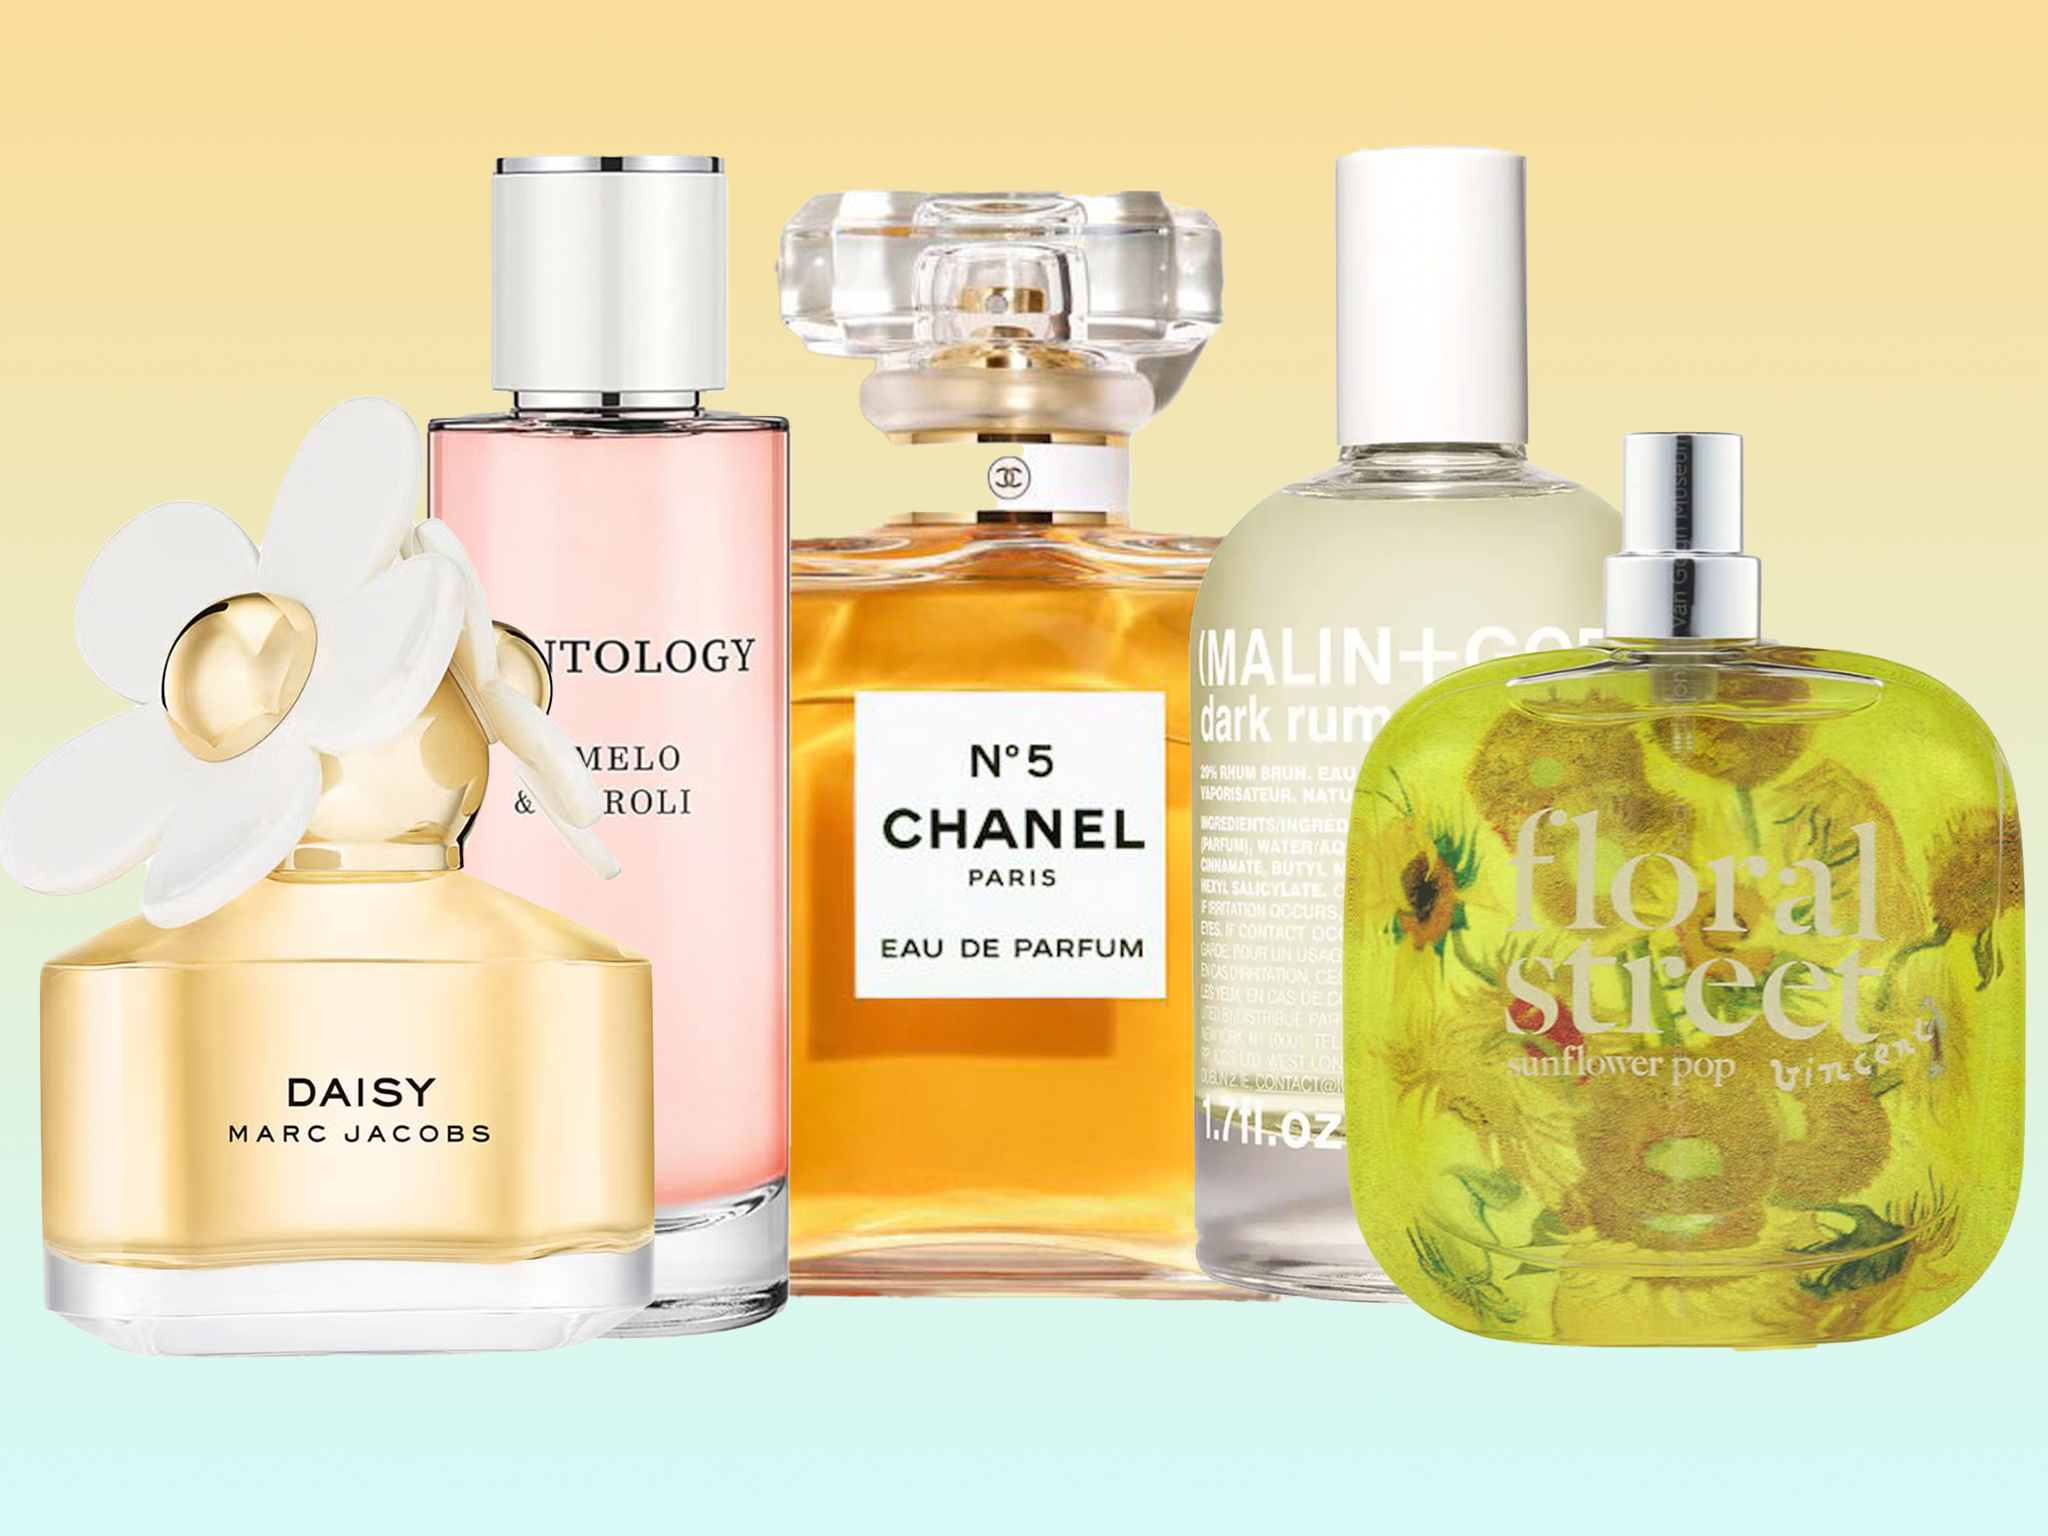 Chanel No5, Marc Jacobs daisy and more are all included